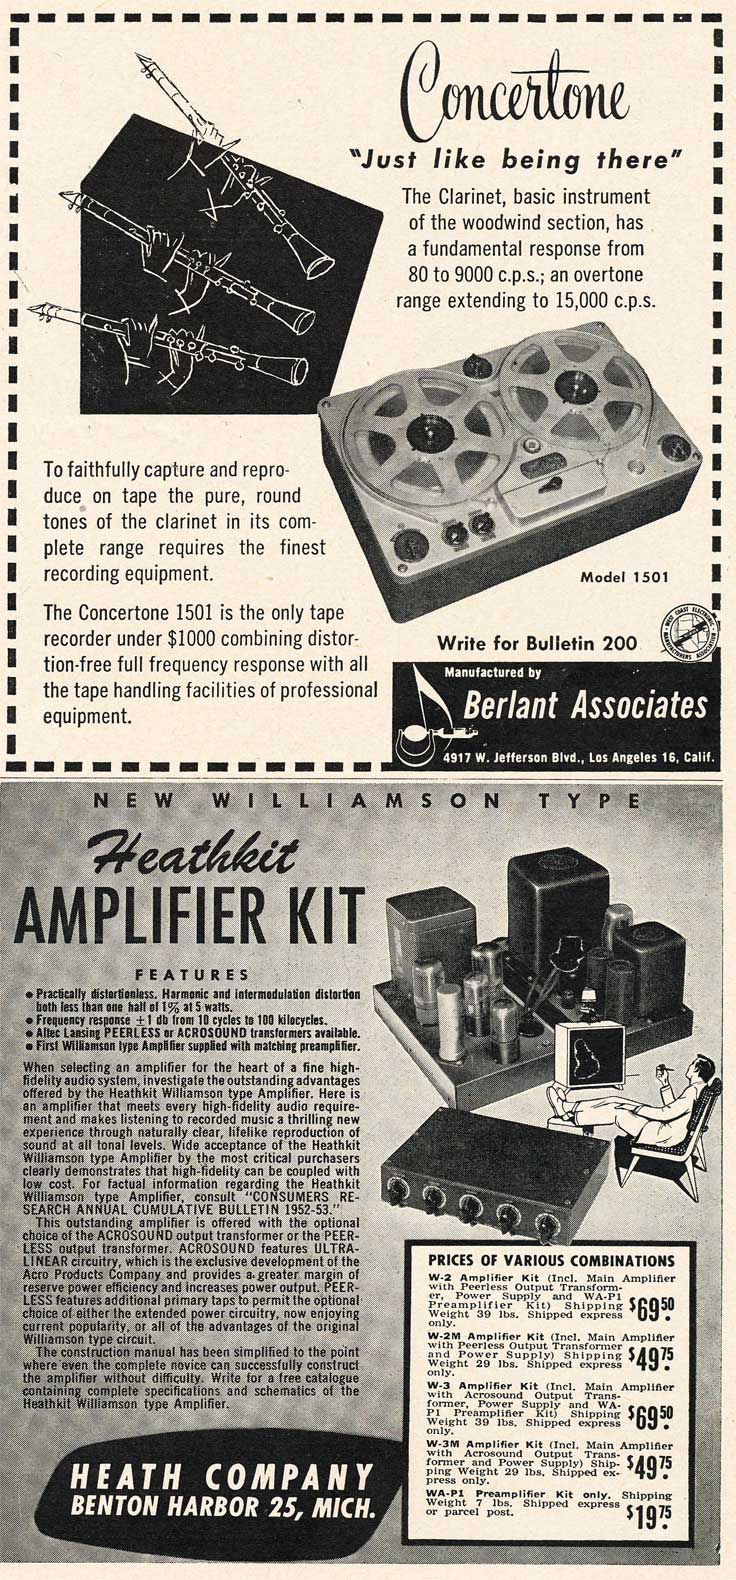 1953 Concertone and HeathKit ads in Reel2ReelTexas.com's vintage recording collection